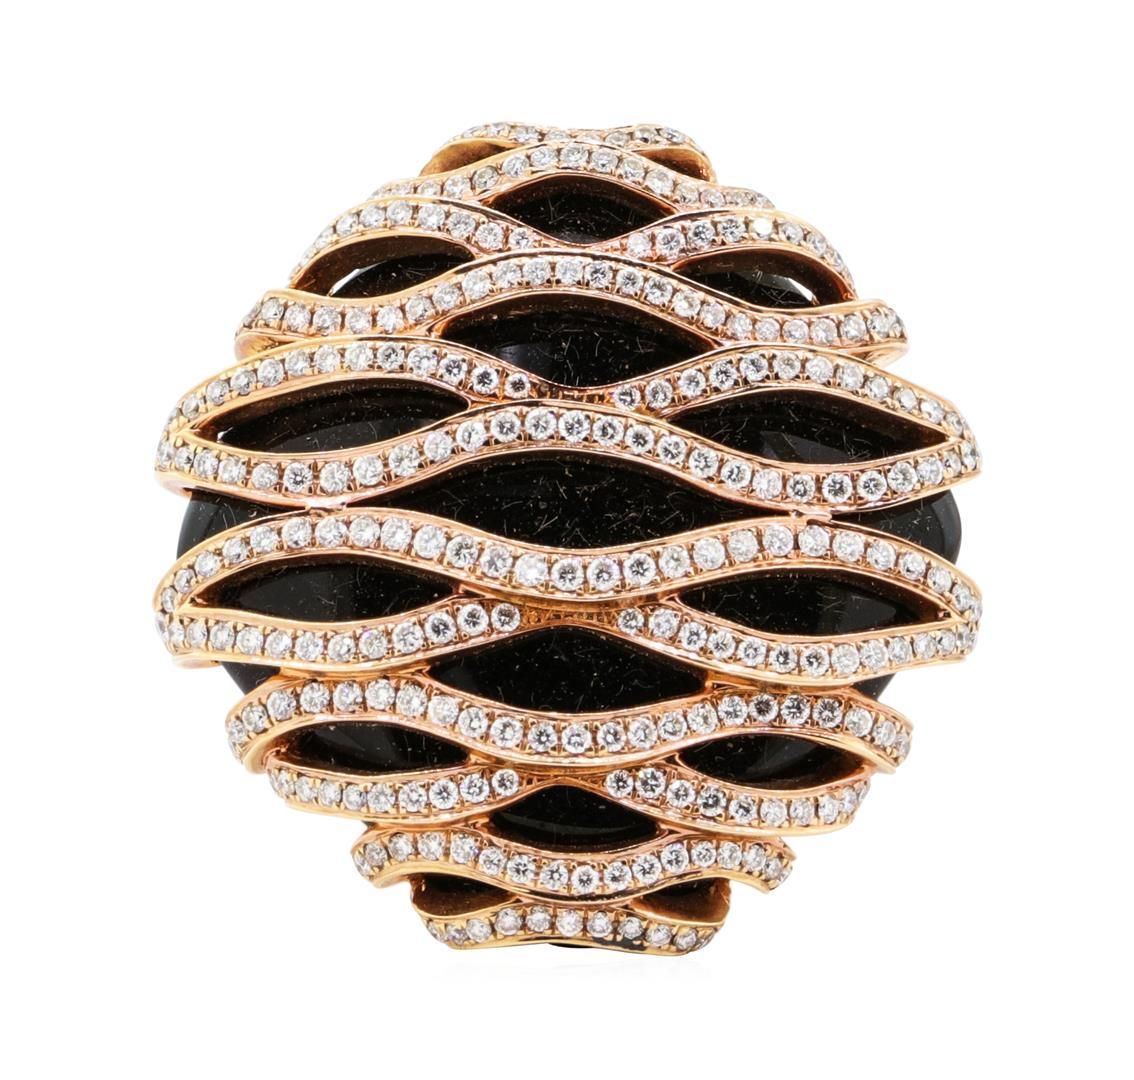 1.65 ctw Diamond and Onyx Ring - 18KT Rose Gold